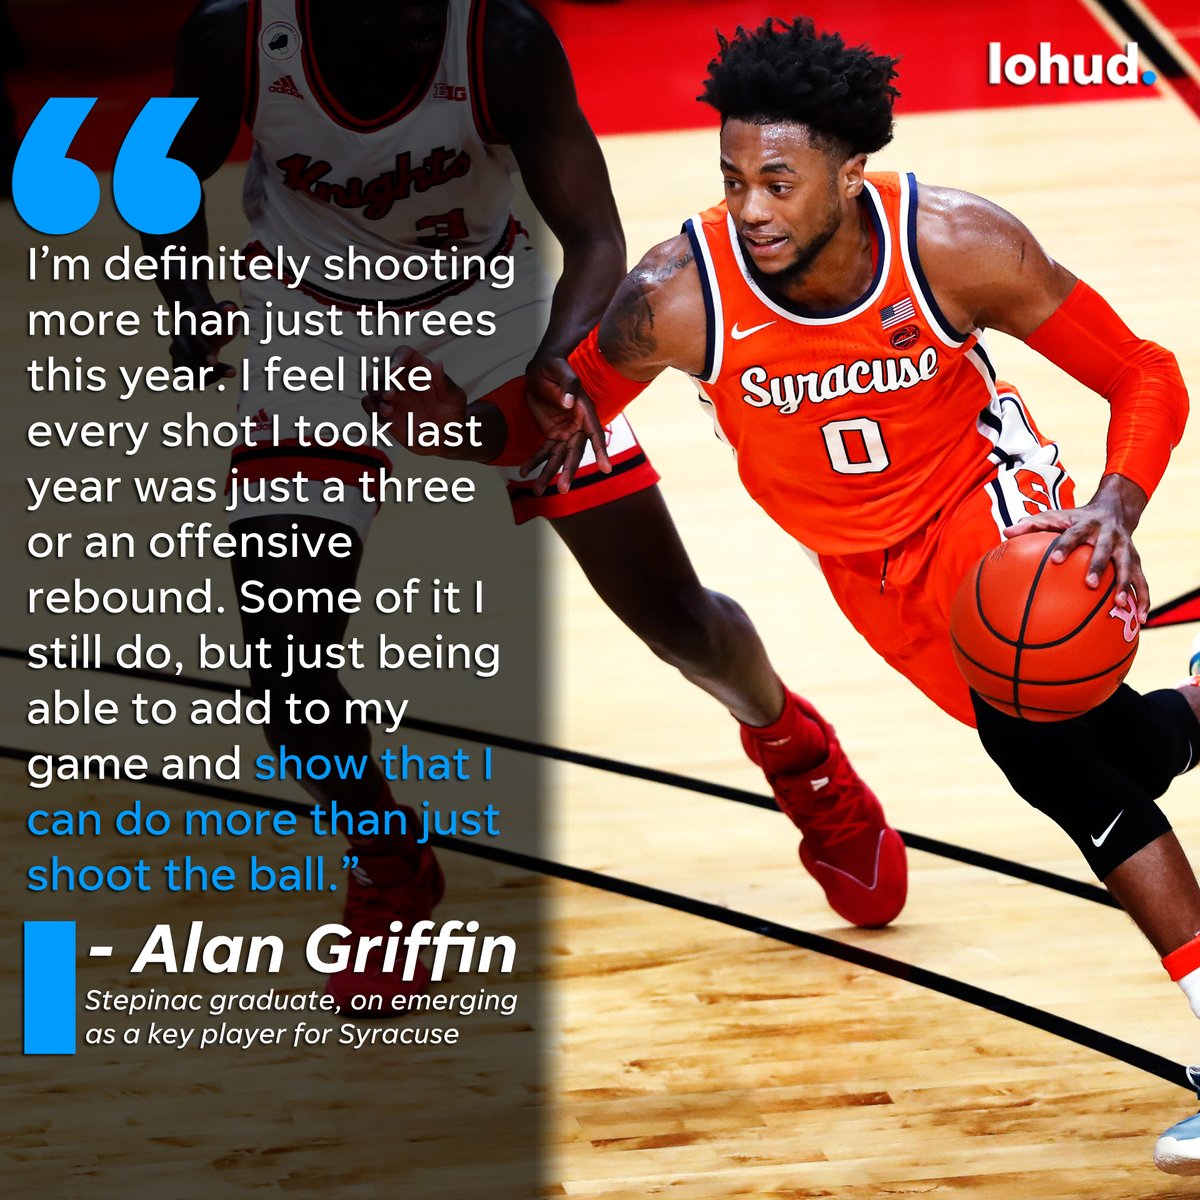 In his first season at Syracuse, former @step_basketball star @alangriffin_ has already emerged as a key player for the orange.

More from @erapay5: https://t.co/zce3ZtG7ez

@StepinacSports @CHSAA_NYC @lohudinsider https://t.co/XiJ5qXzeSg